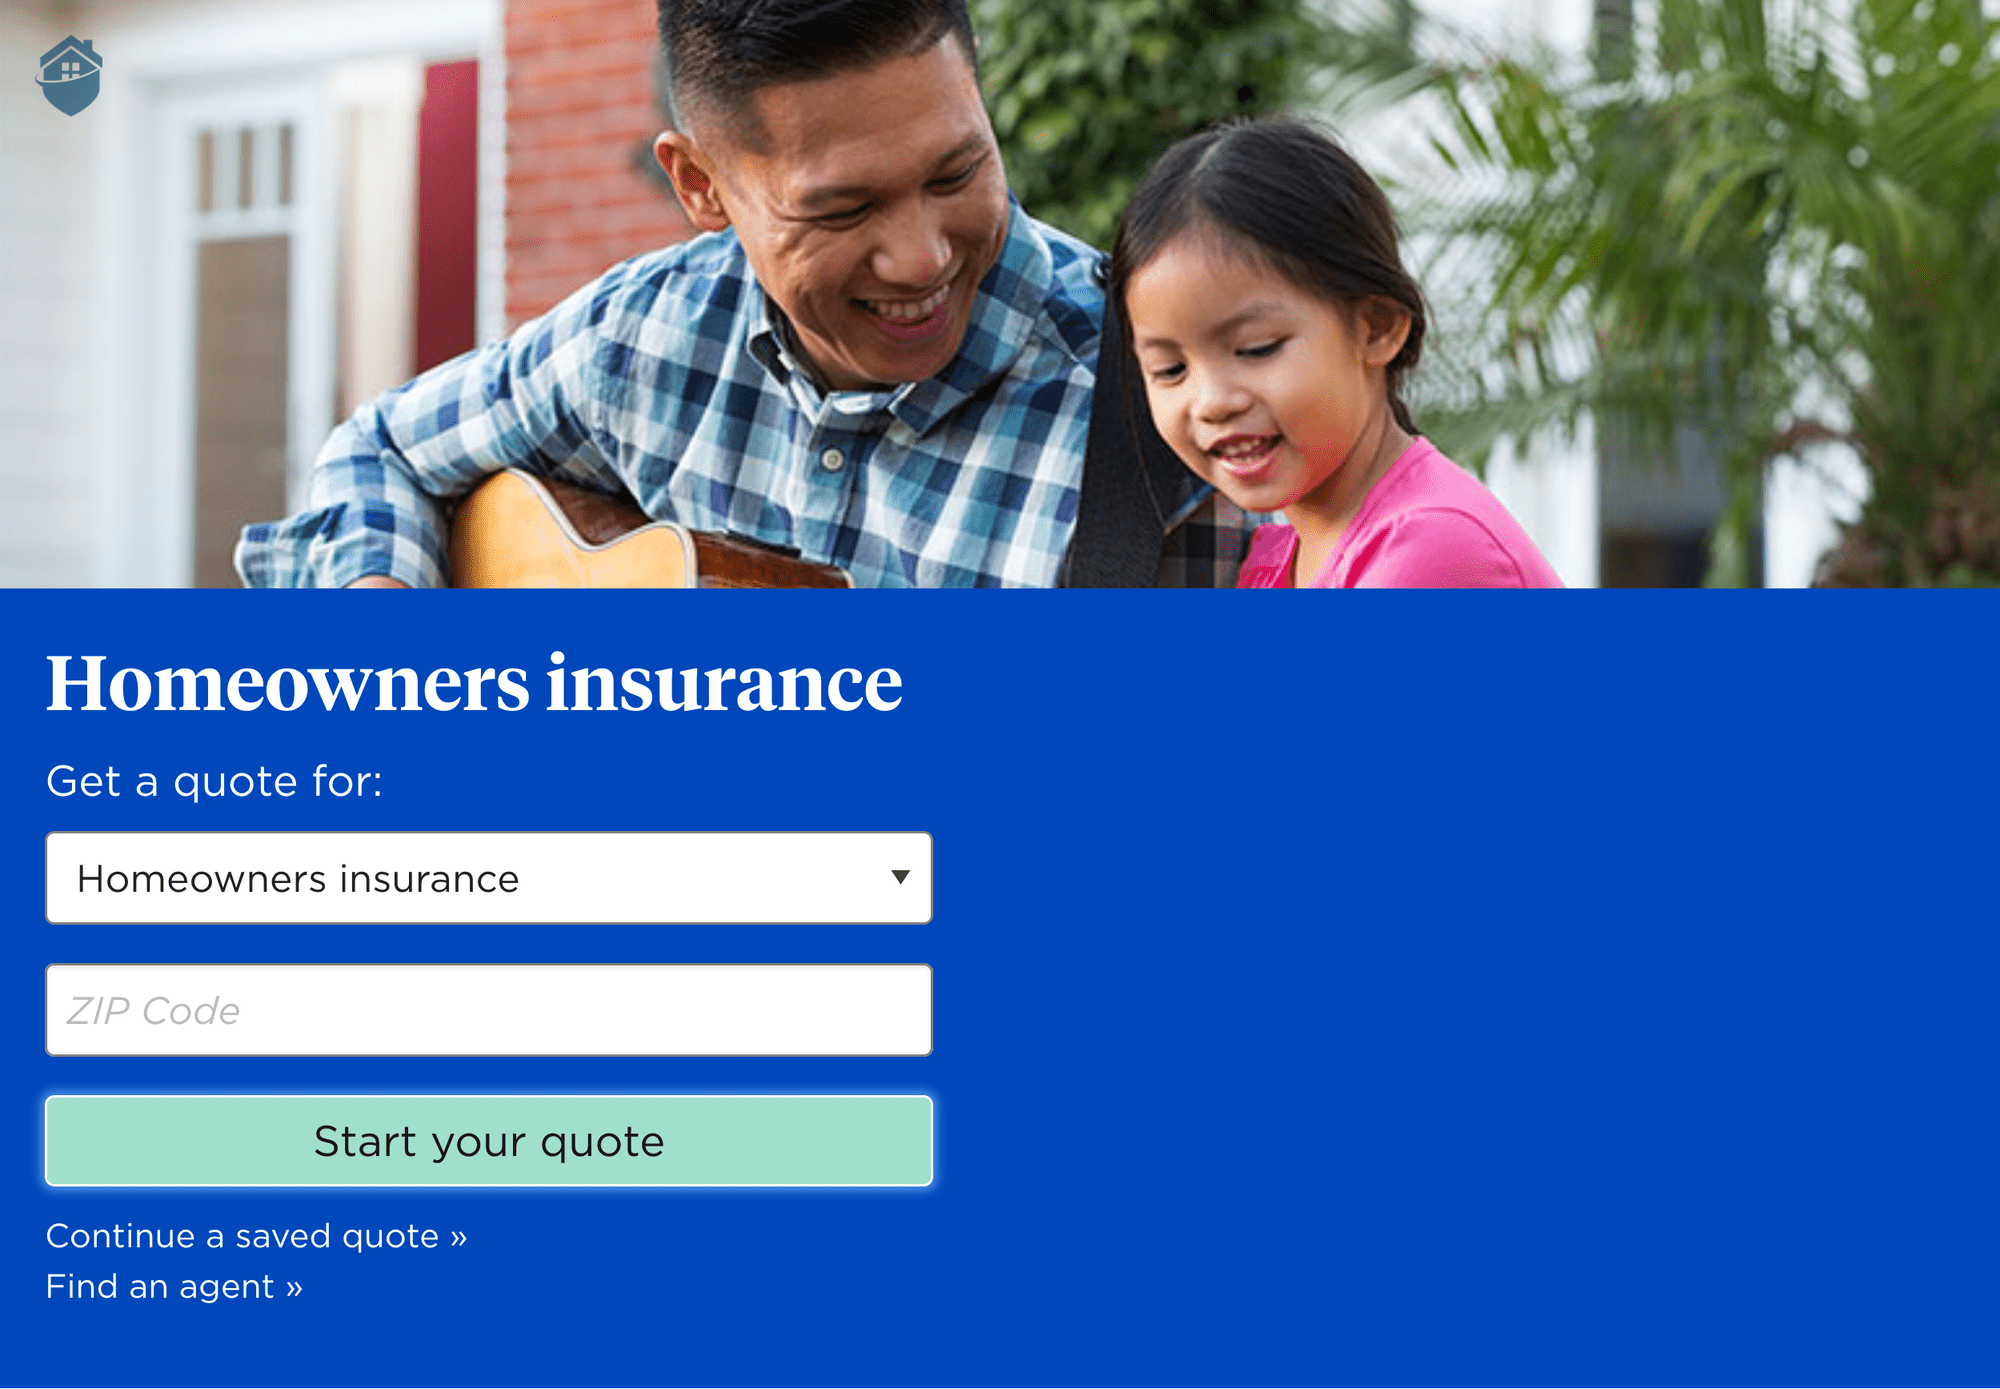 Nationwide has been insuring Americans since 1926.